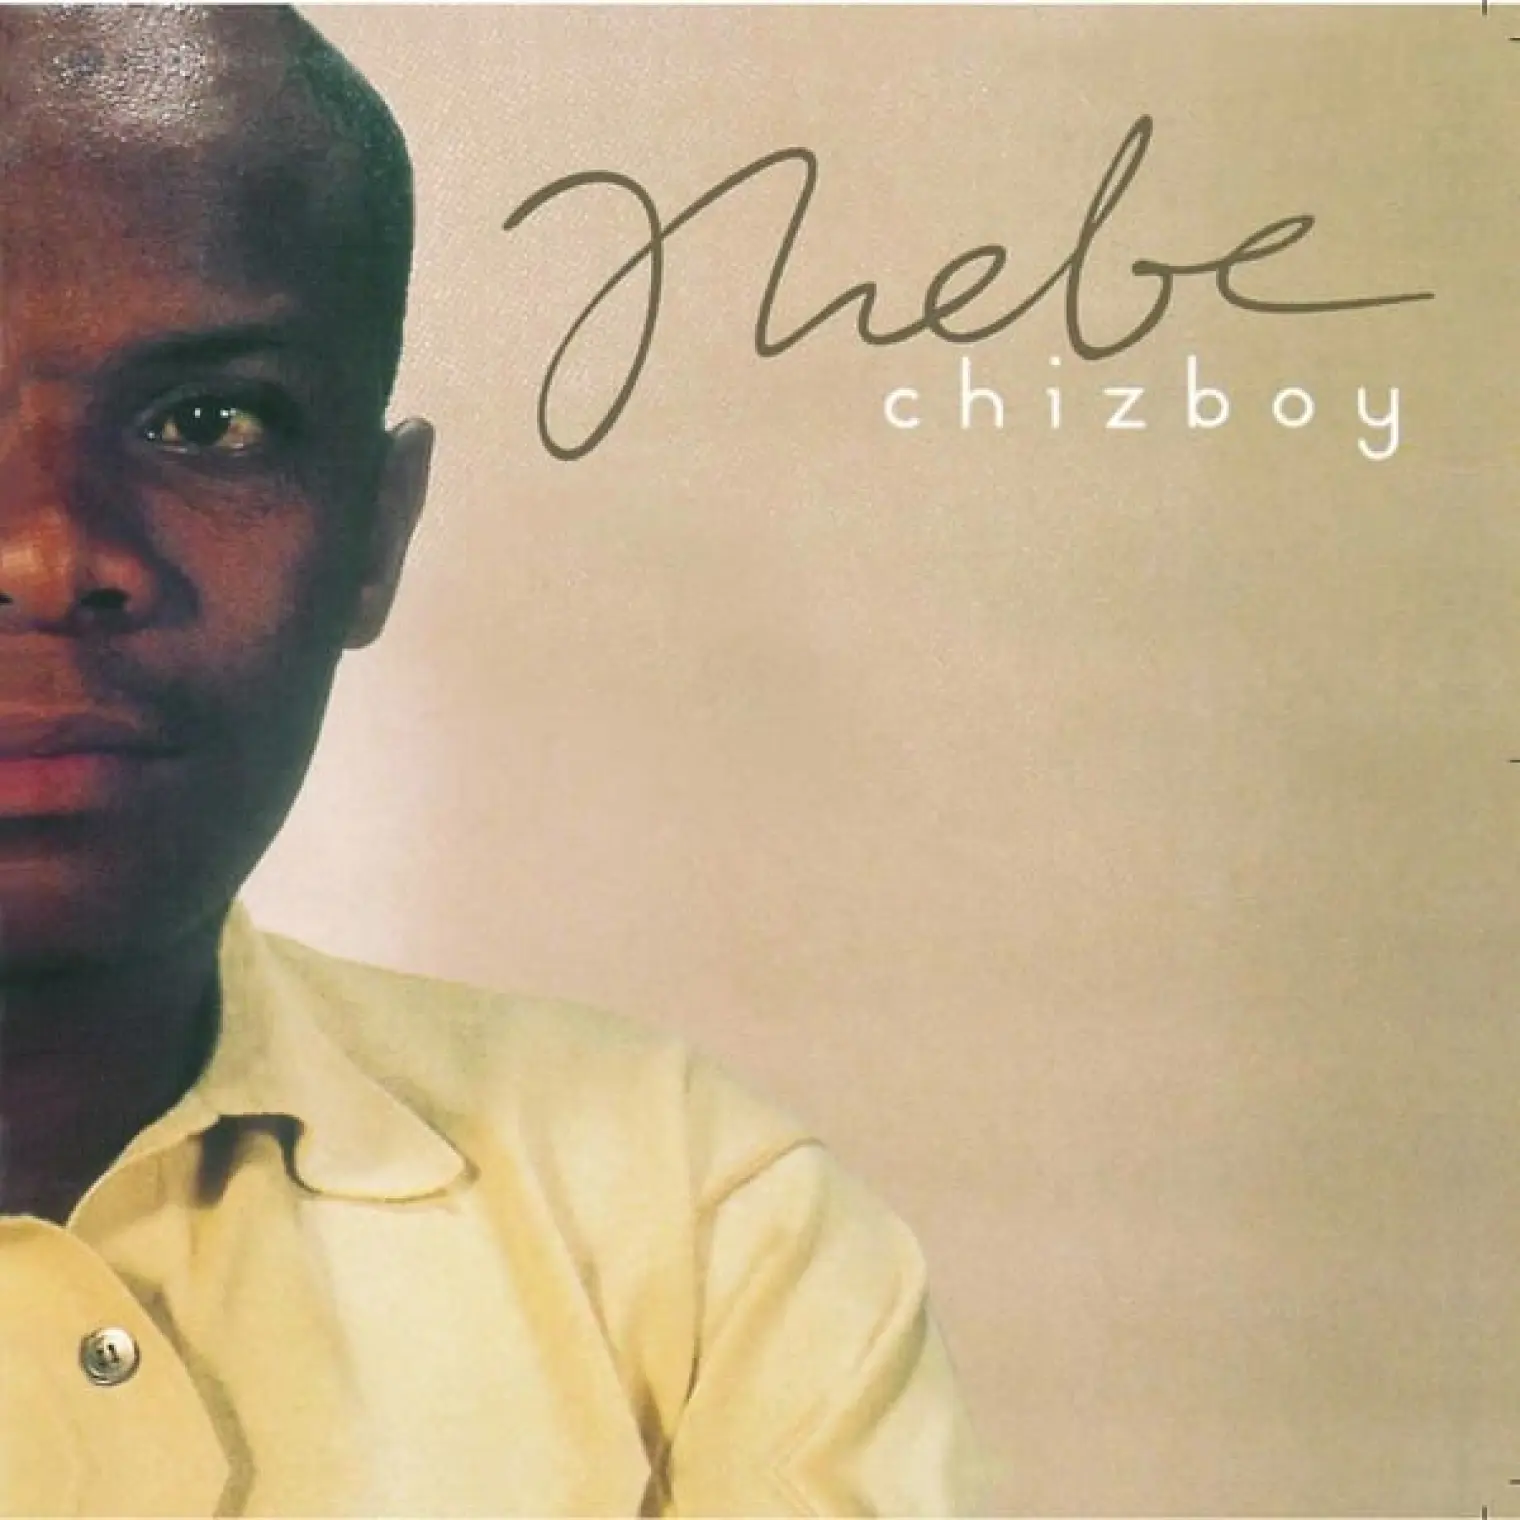 Chizboy -  Thebe 